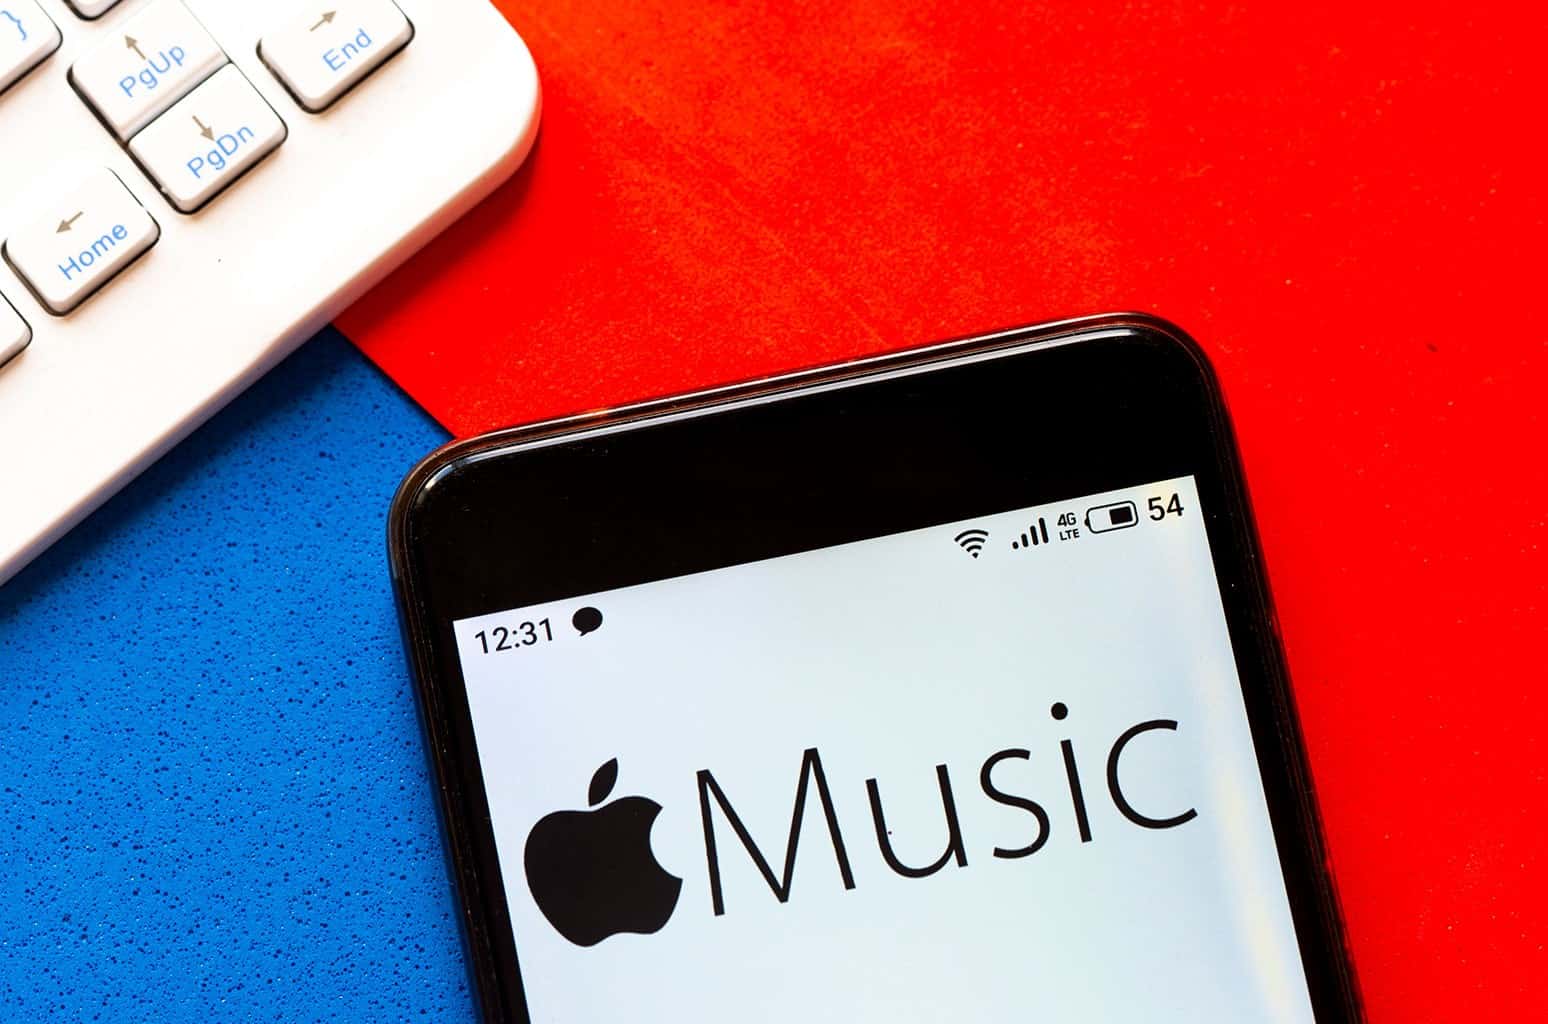 Lossless Audio announced at no extra cost by Apple Music